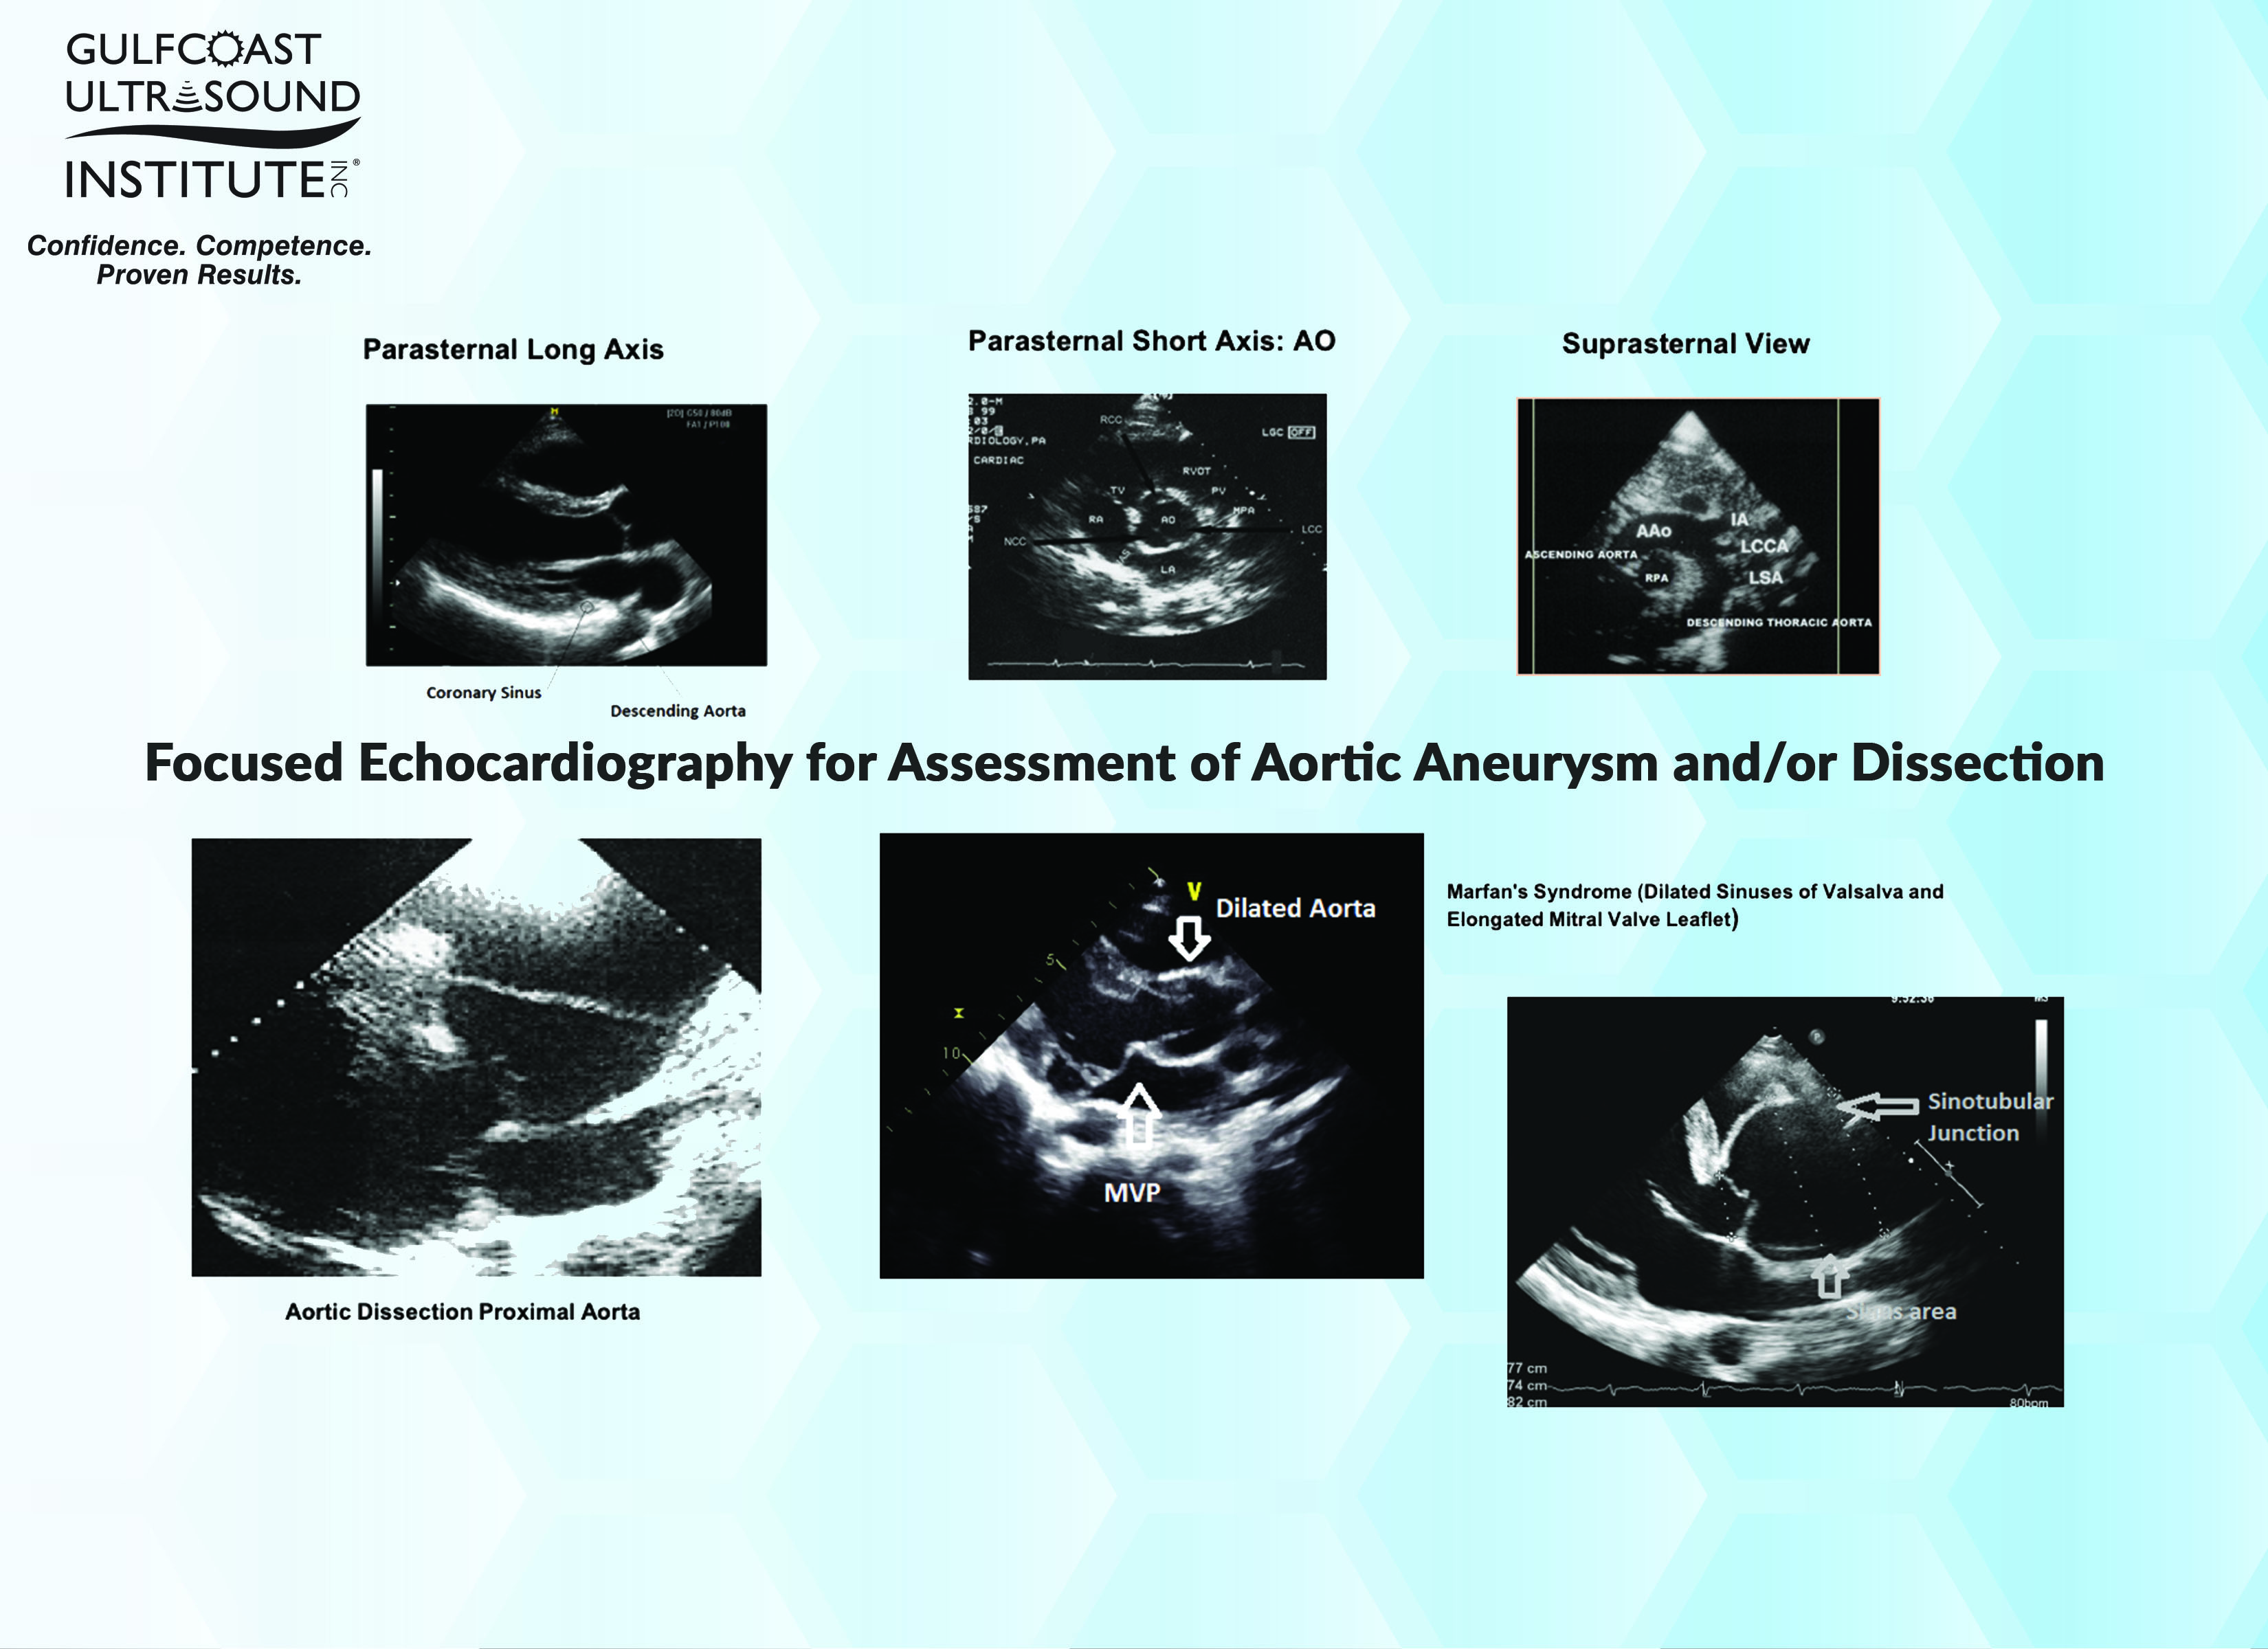 Focused Echocardiography for Assessment of Aortic Aneurysm and/or Dissection